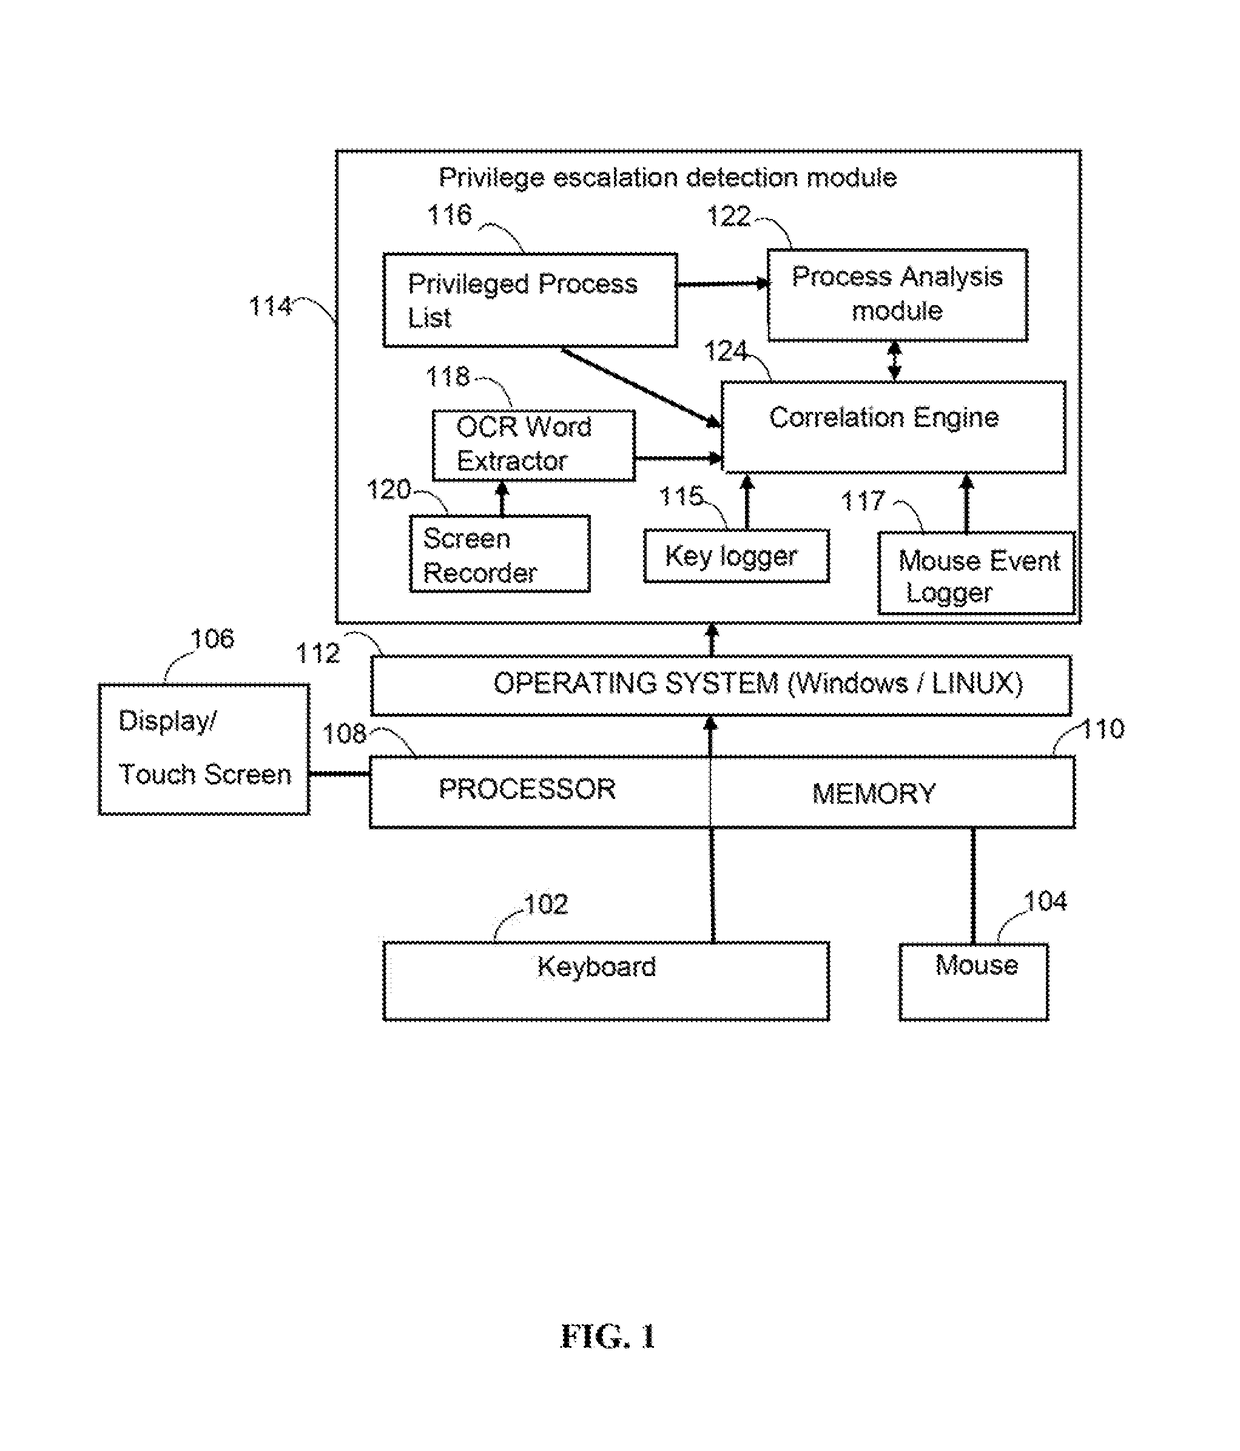 System and method for zero-day privilege escalation malware detection